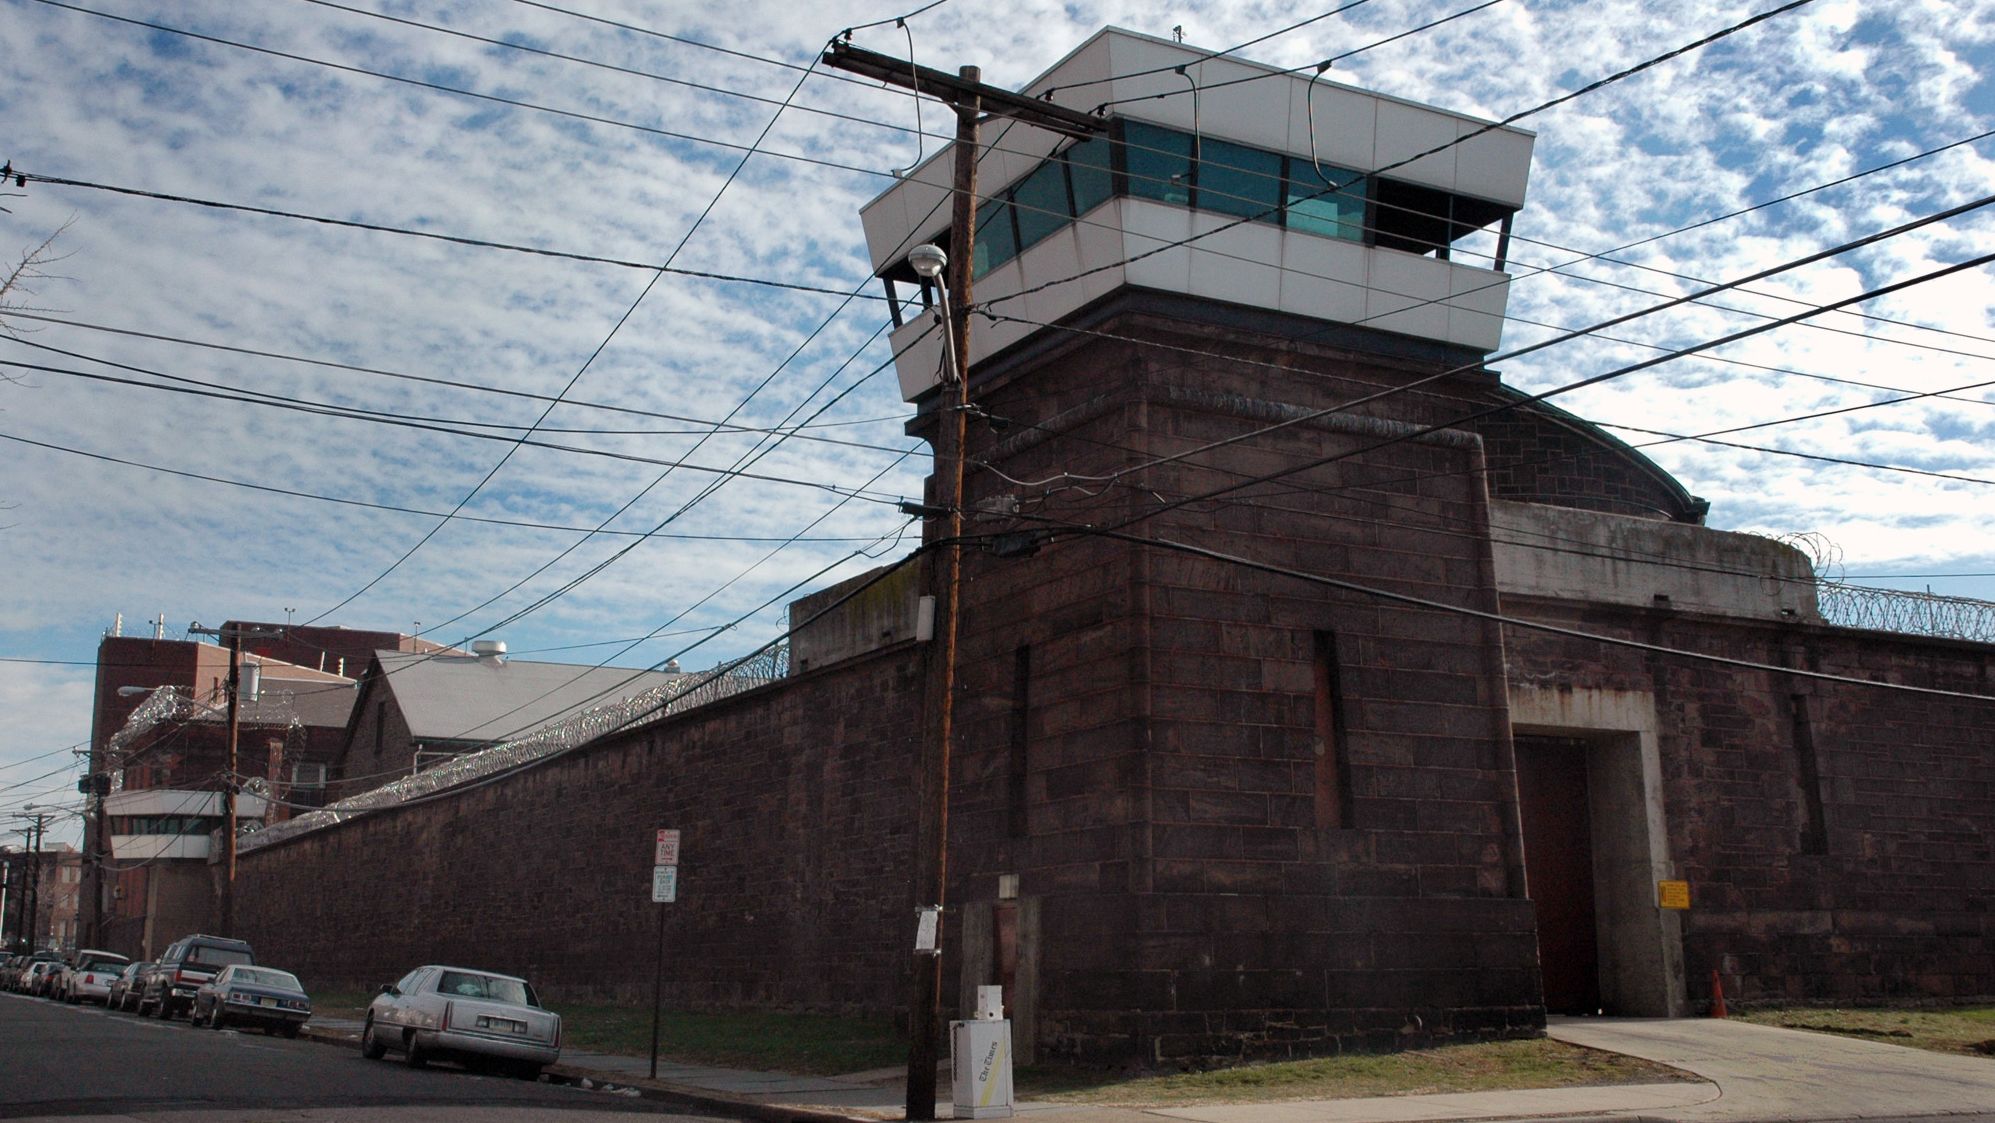 The New Jersey State Prison in Trenton is seen in December 2005.